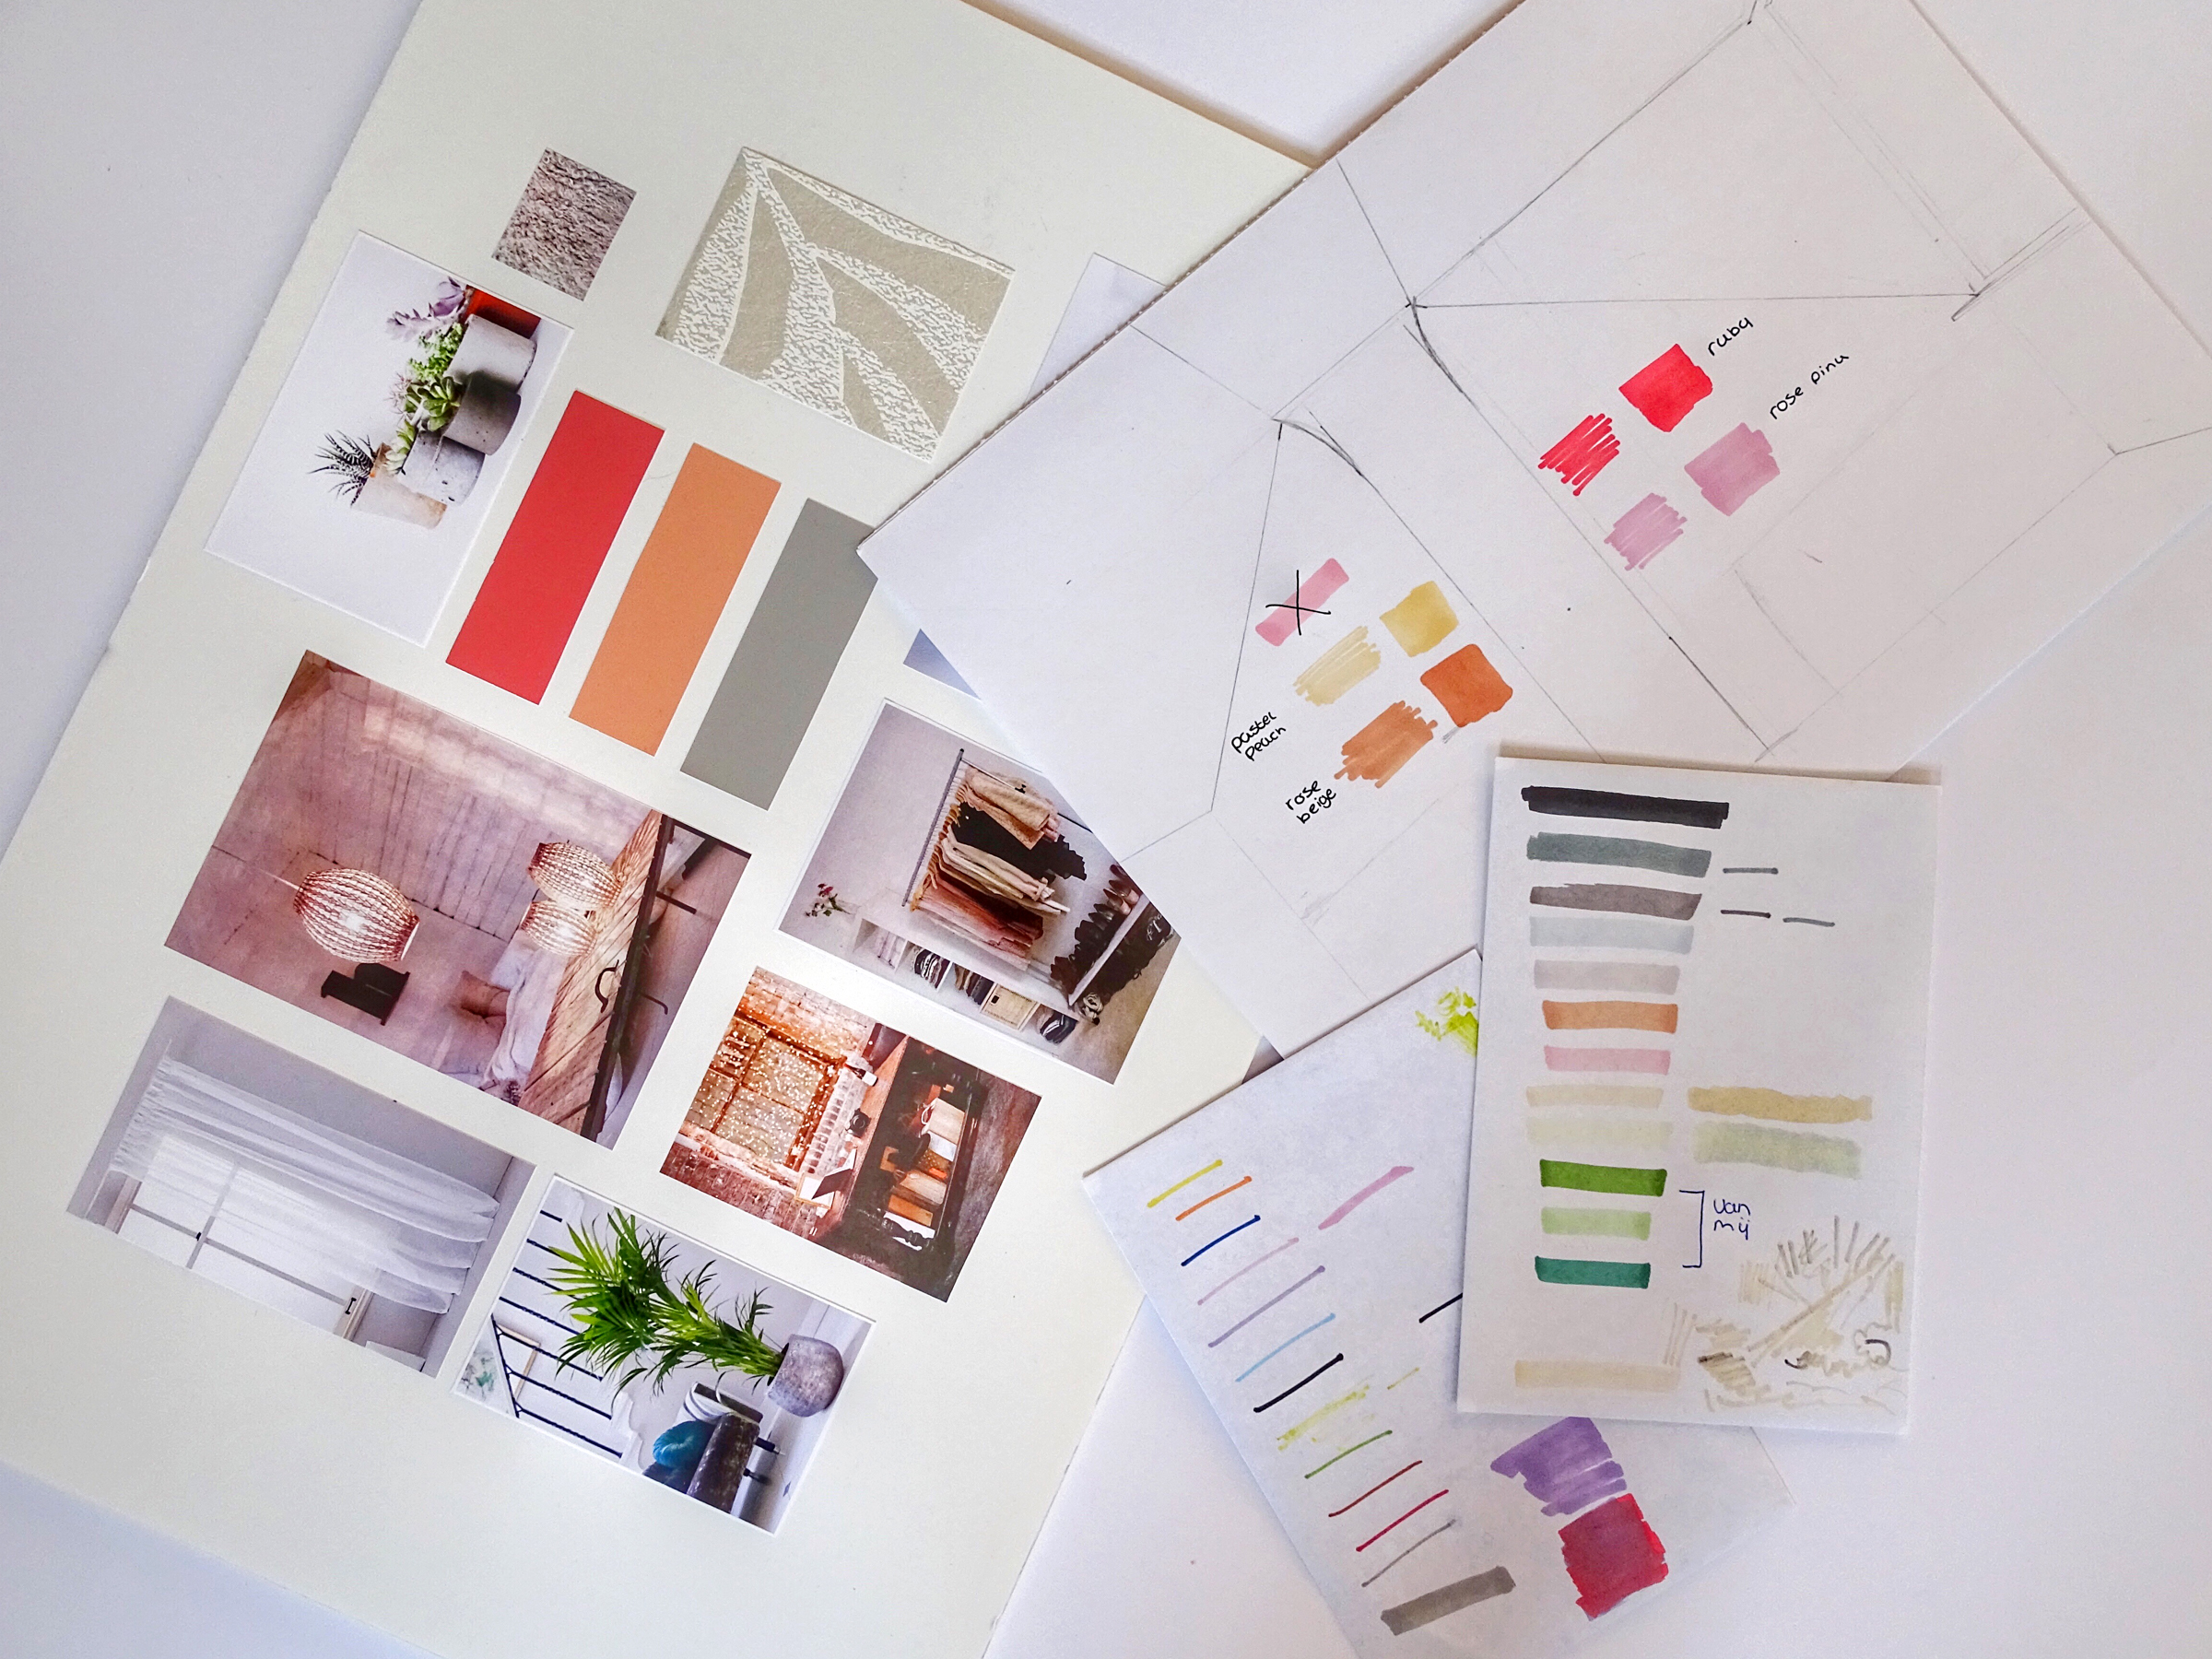 How to create a moodboard, what to include.